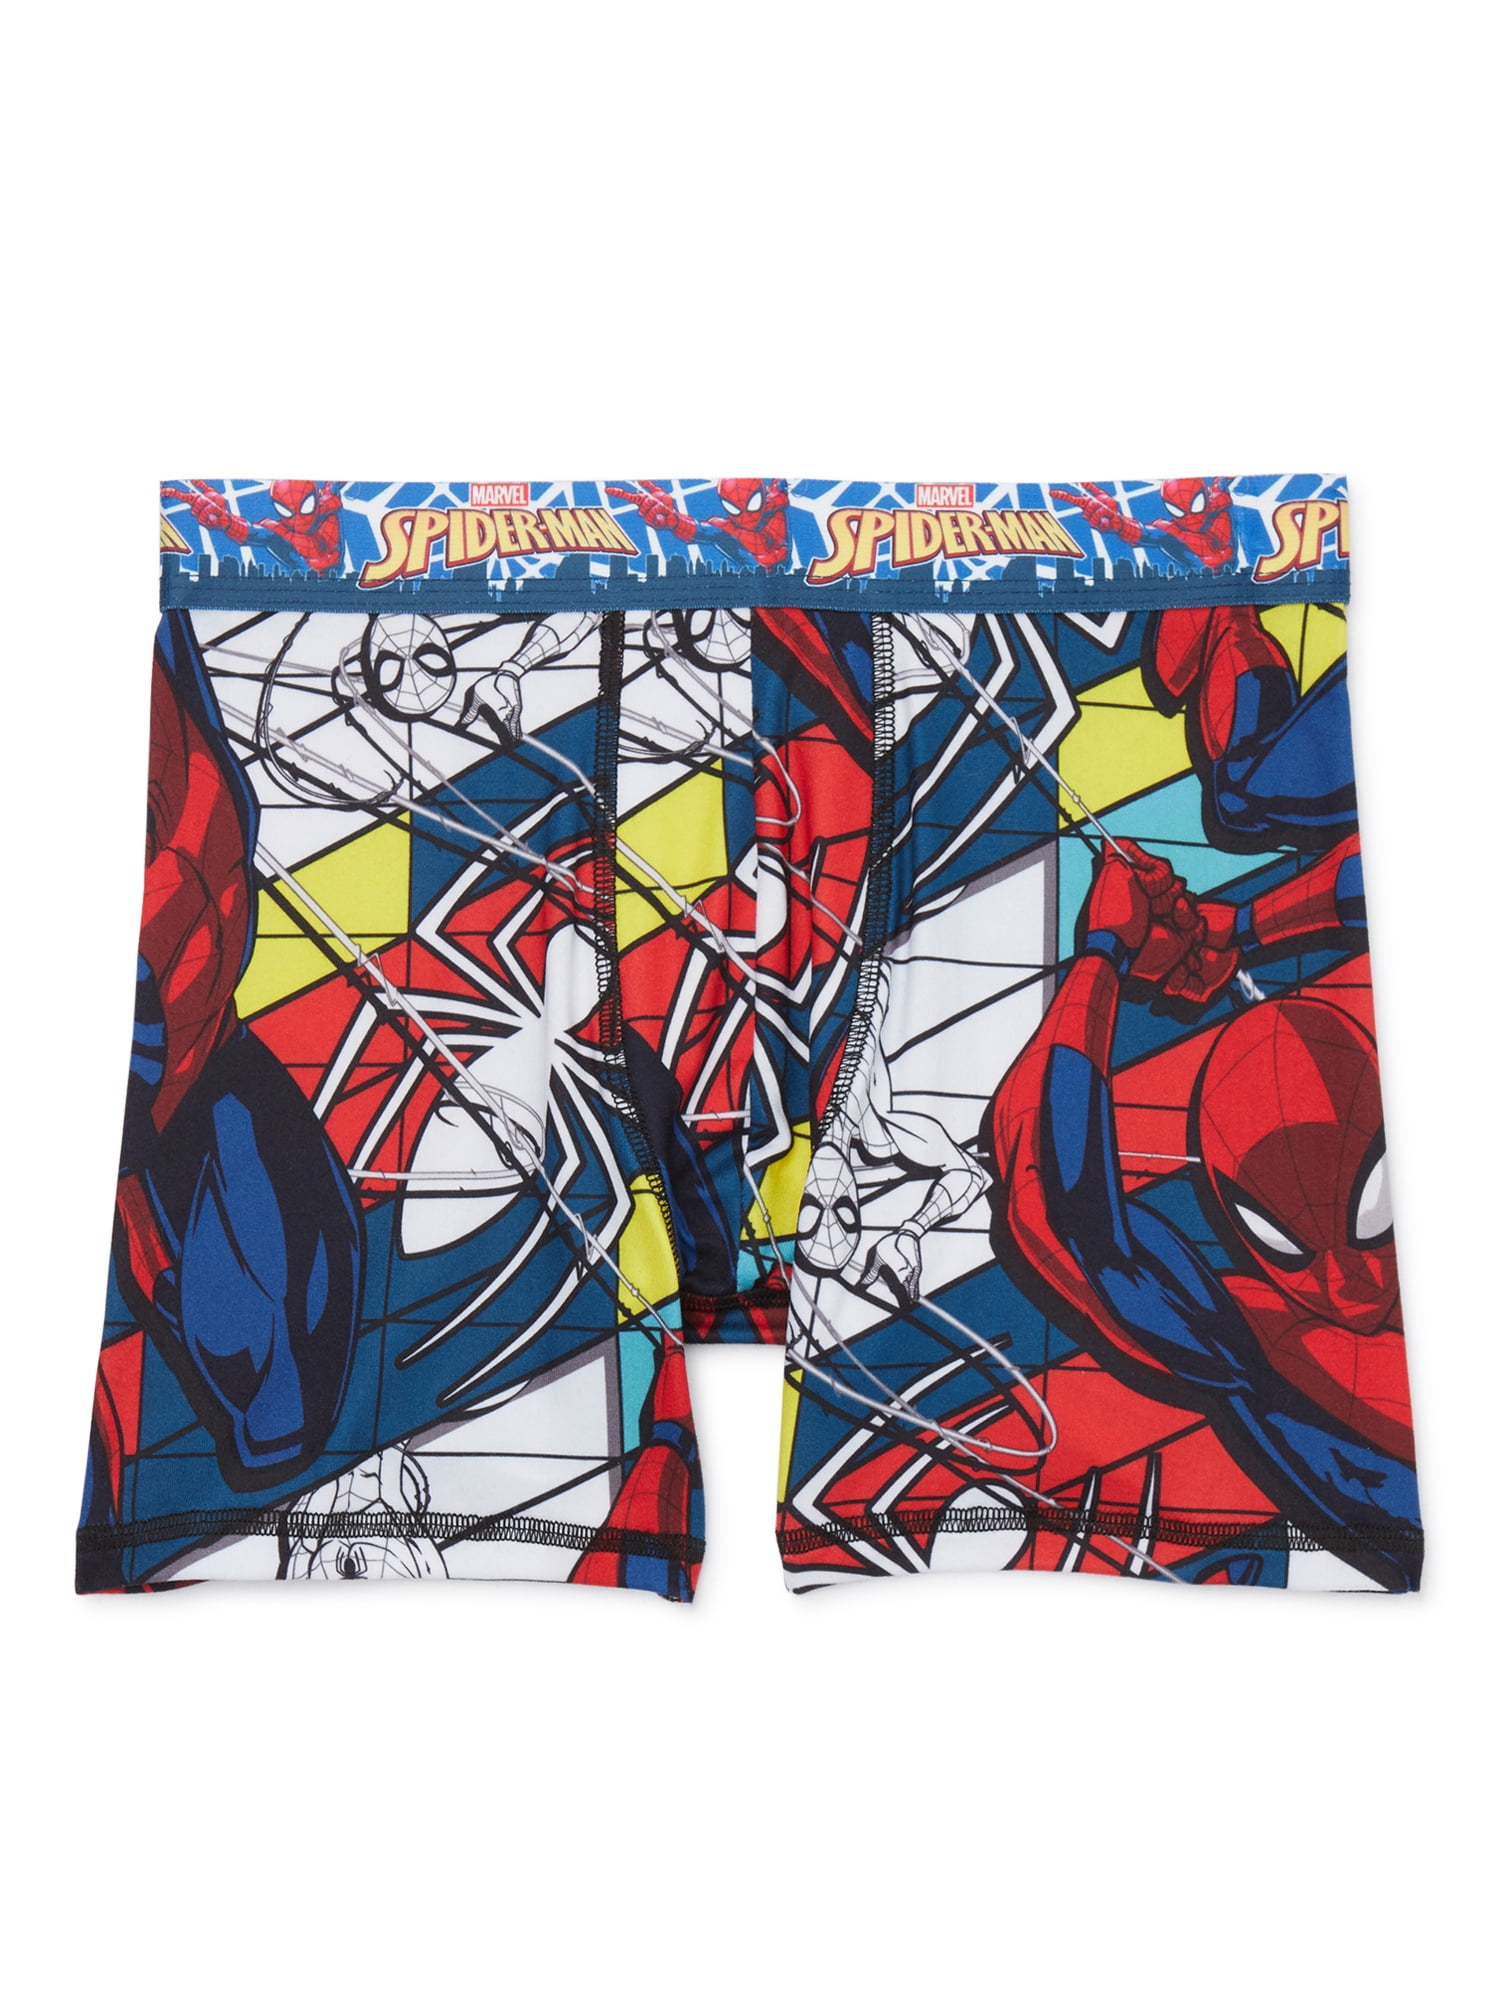 ❤️Spiderman boxers❤️  Spiderman outfit, Boxers aesthetic